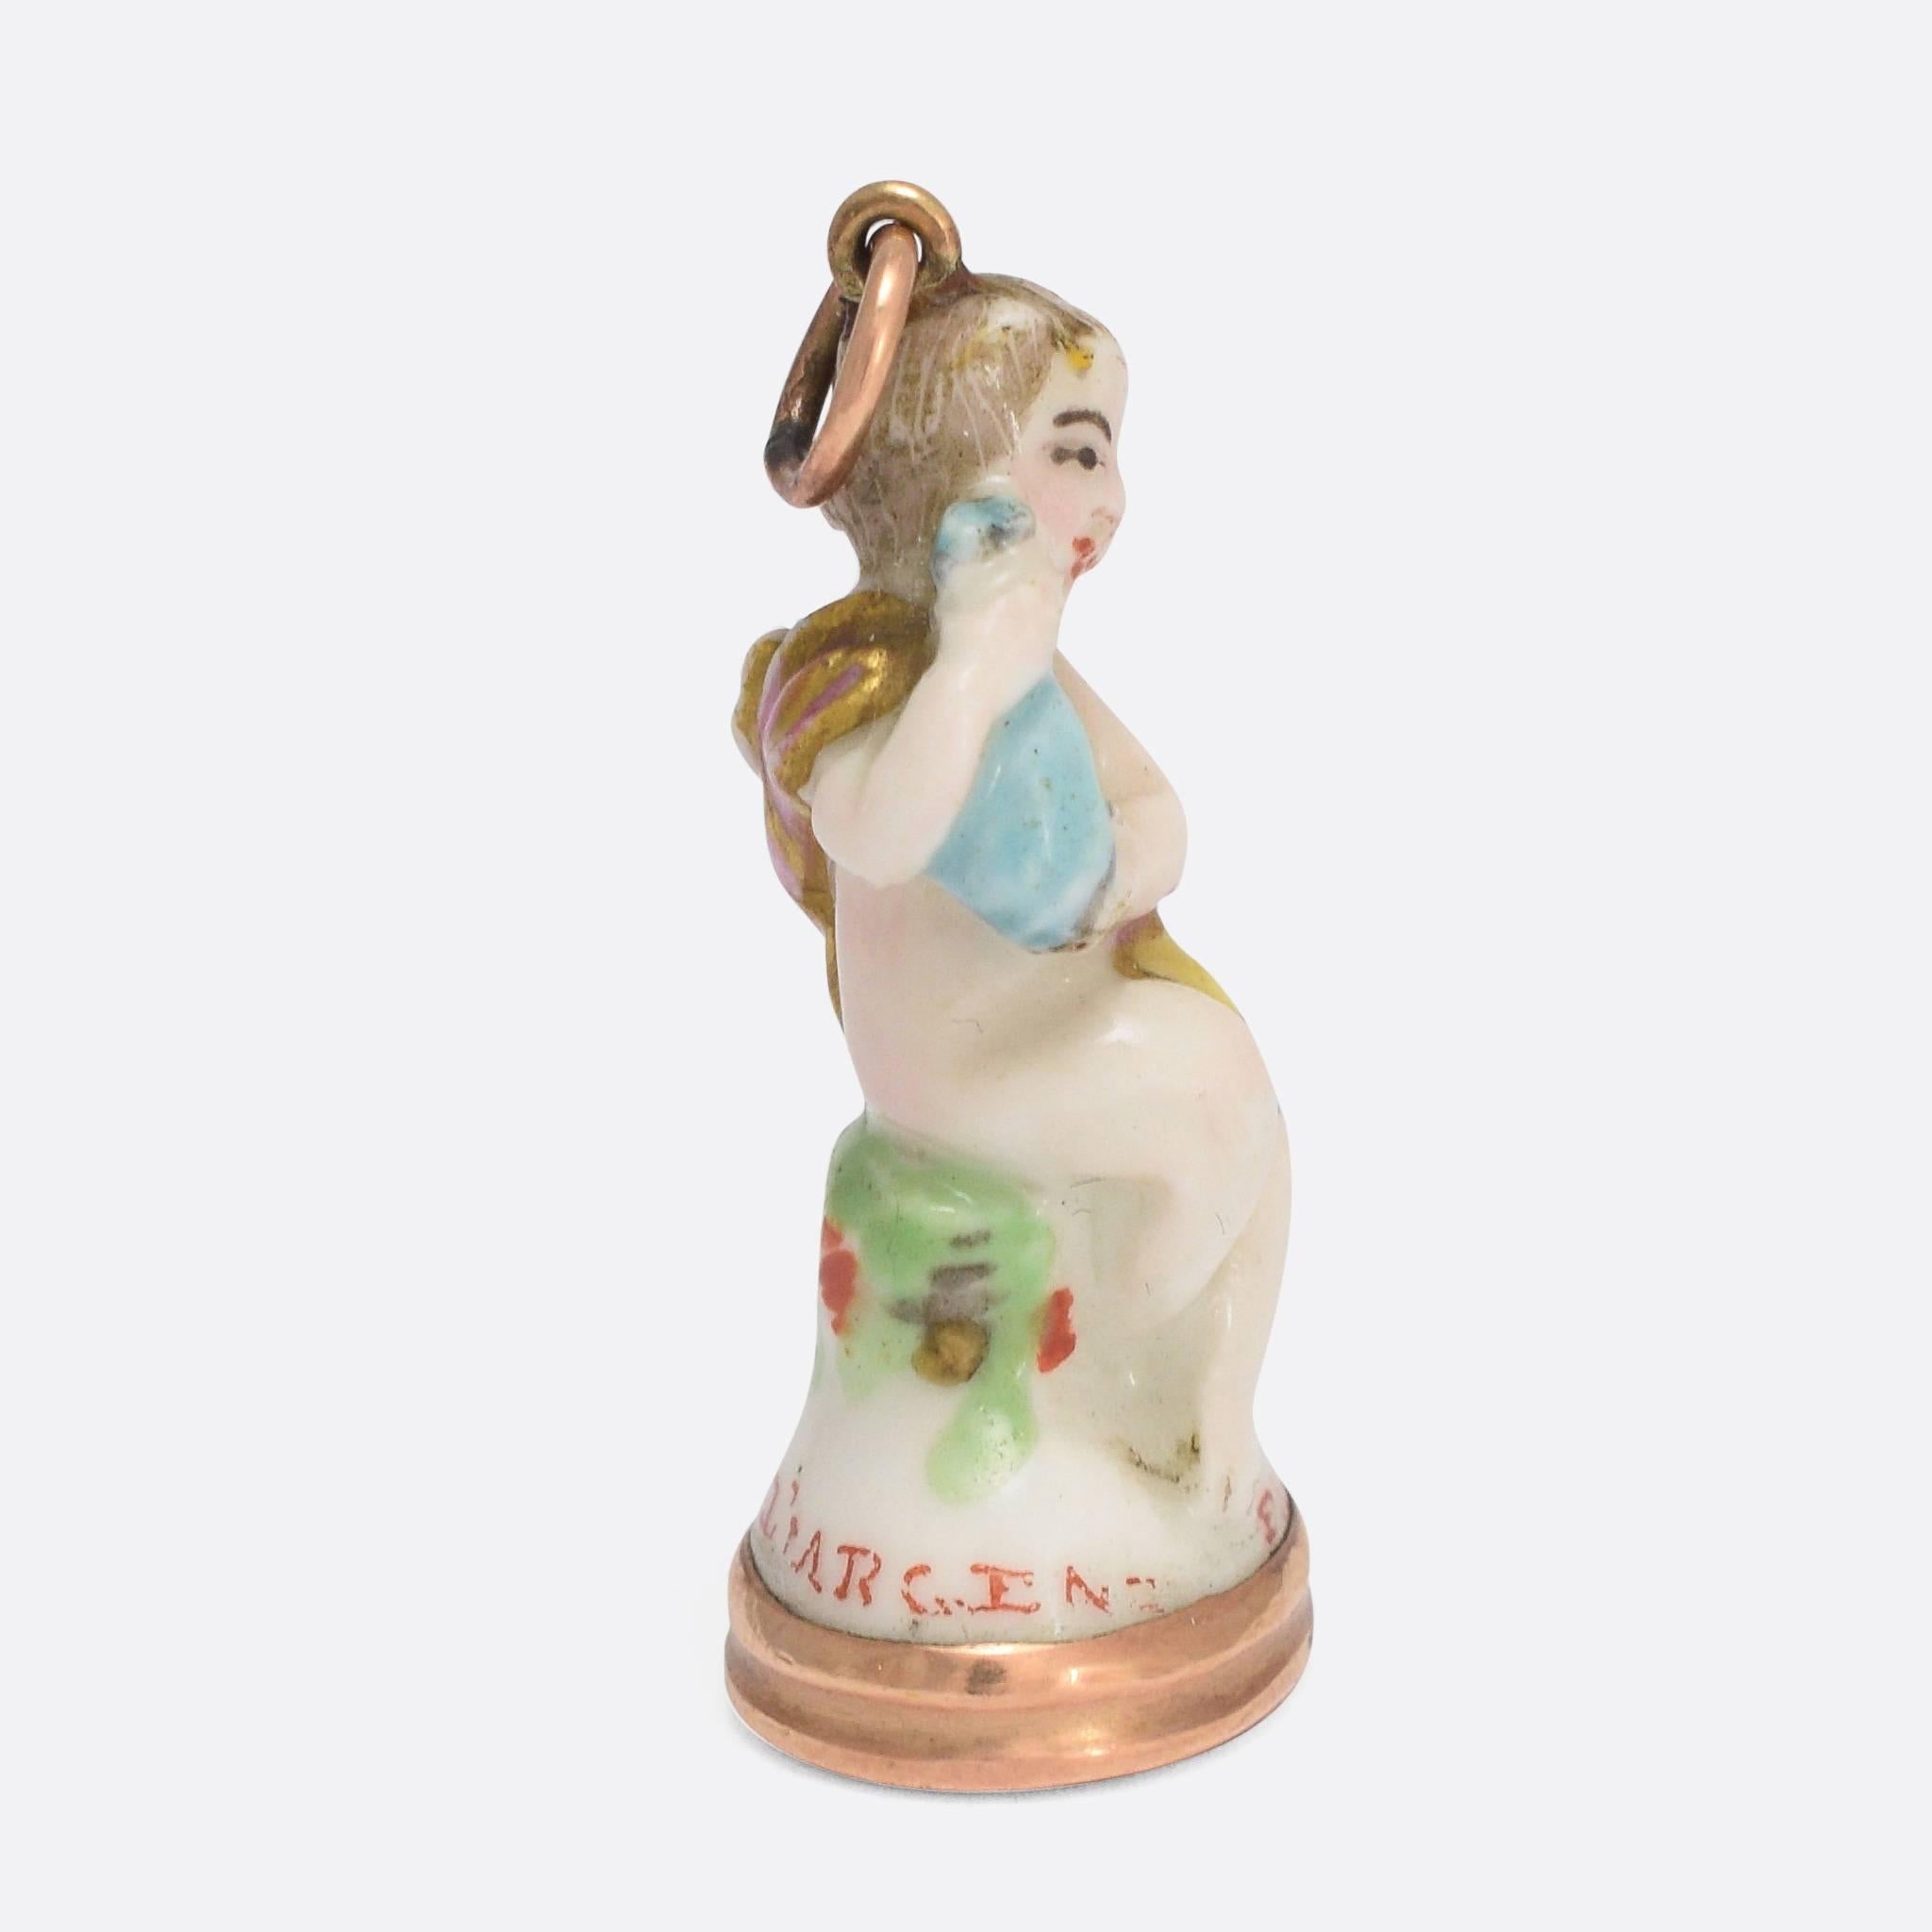 An original 18th Century porcelain Derby Chelsea period fob seal. This particular piece features Cupid holding a bottle and displays the pale colouring typical of the Chelsea factory. The gold bail and seal base are both present on this Georgian